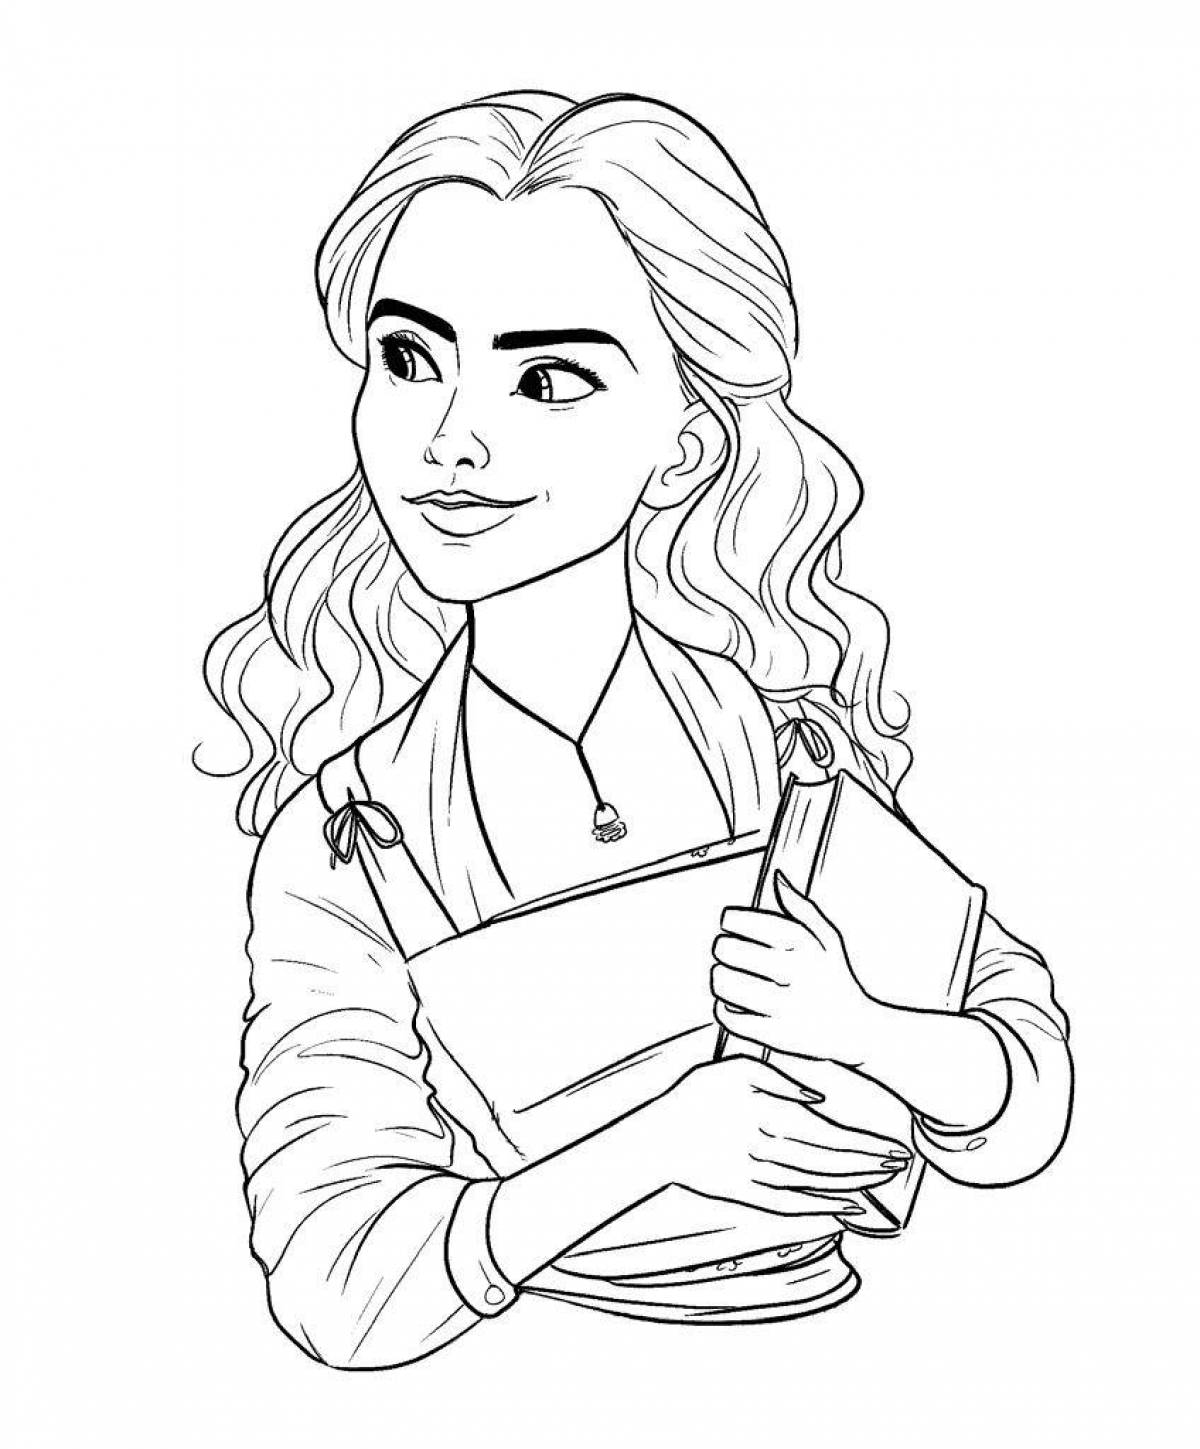 Hermione granger coloring page